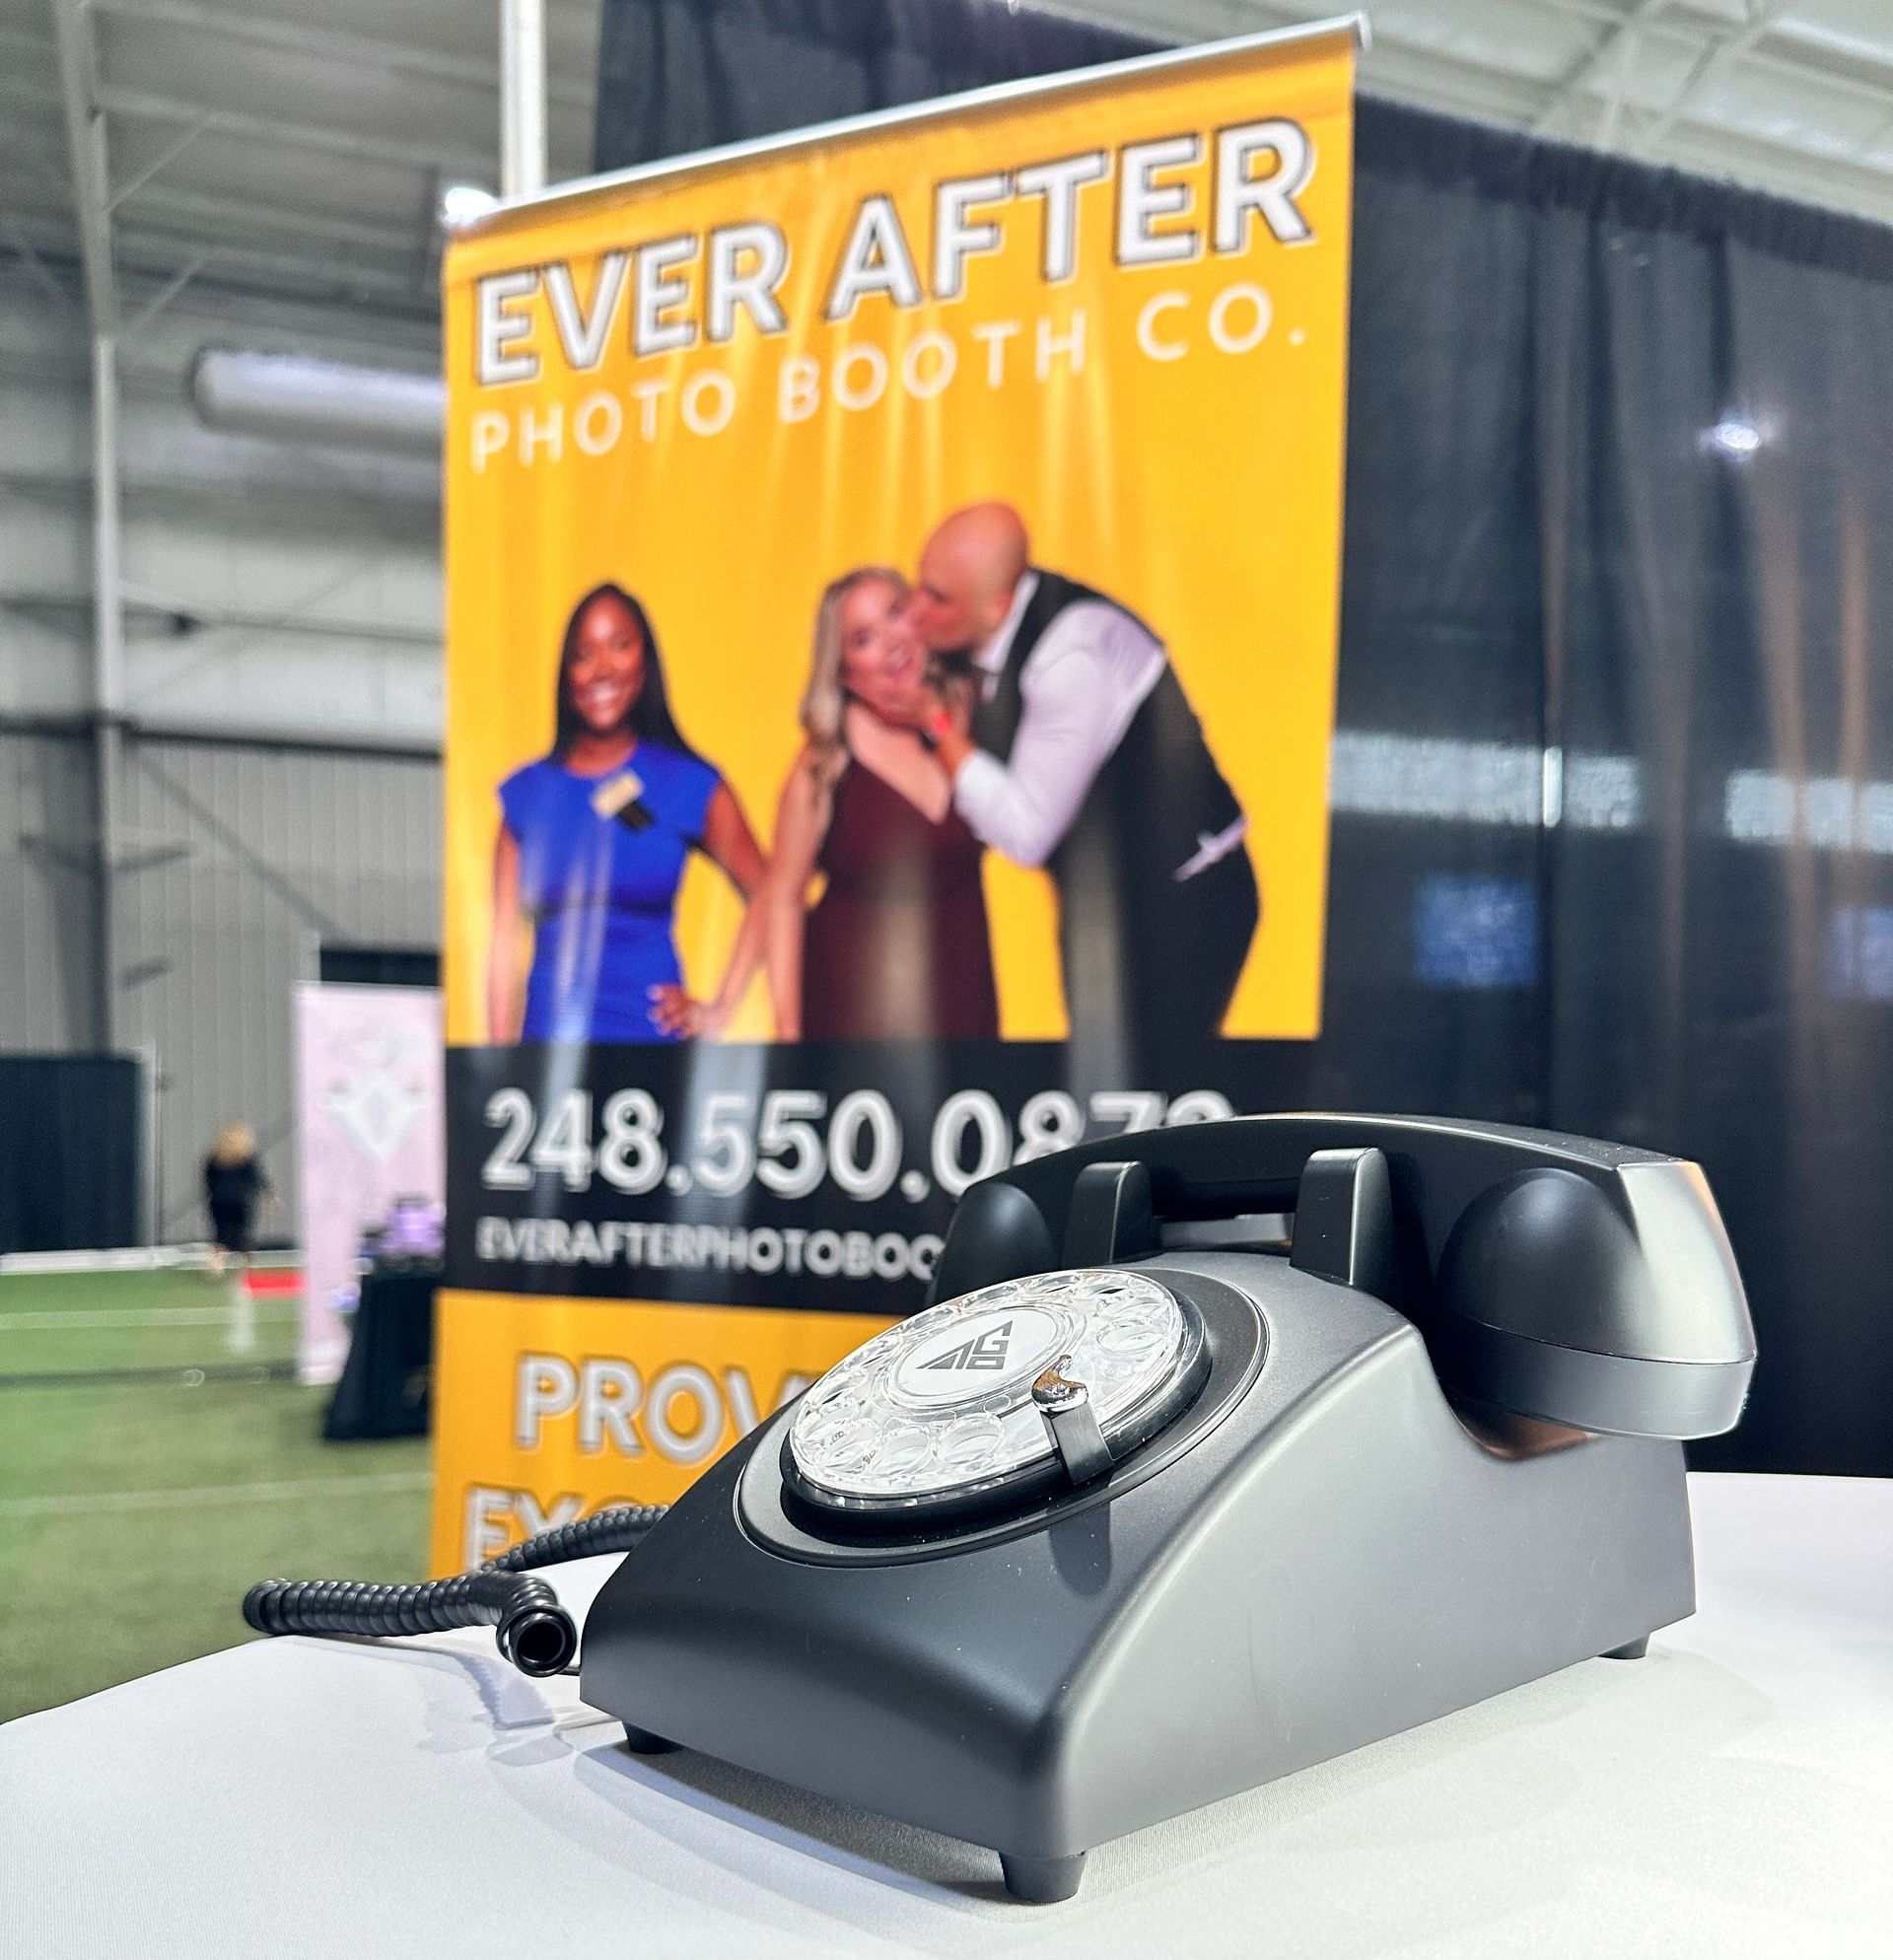 a phone sits in front of a banner that says ever after photo booth co.